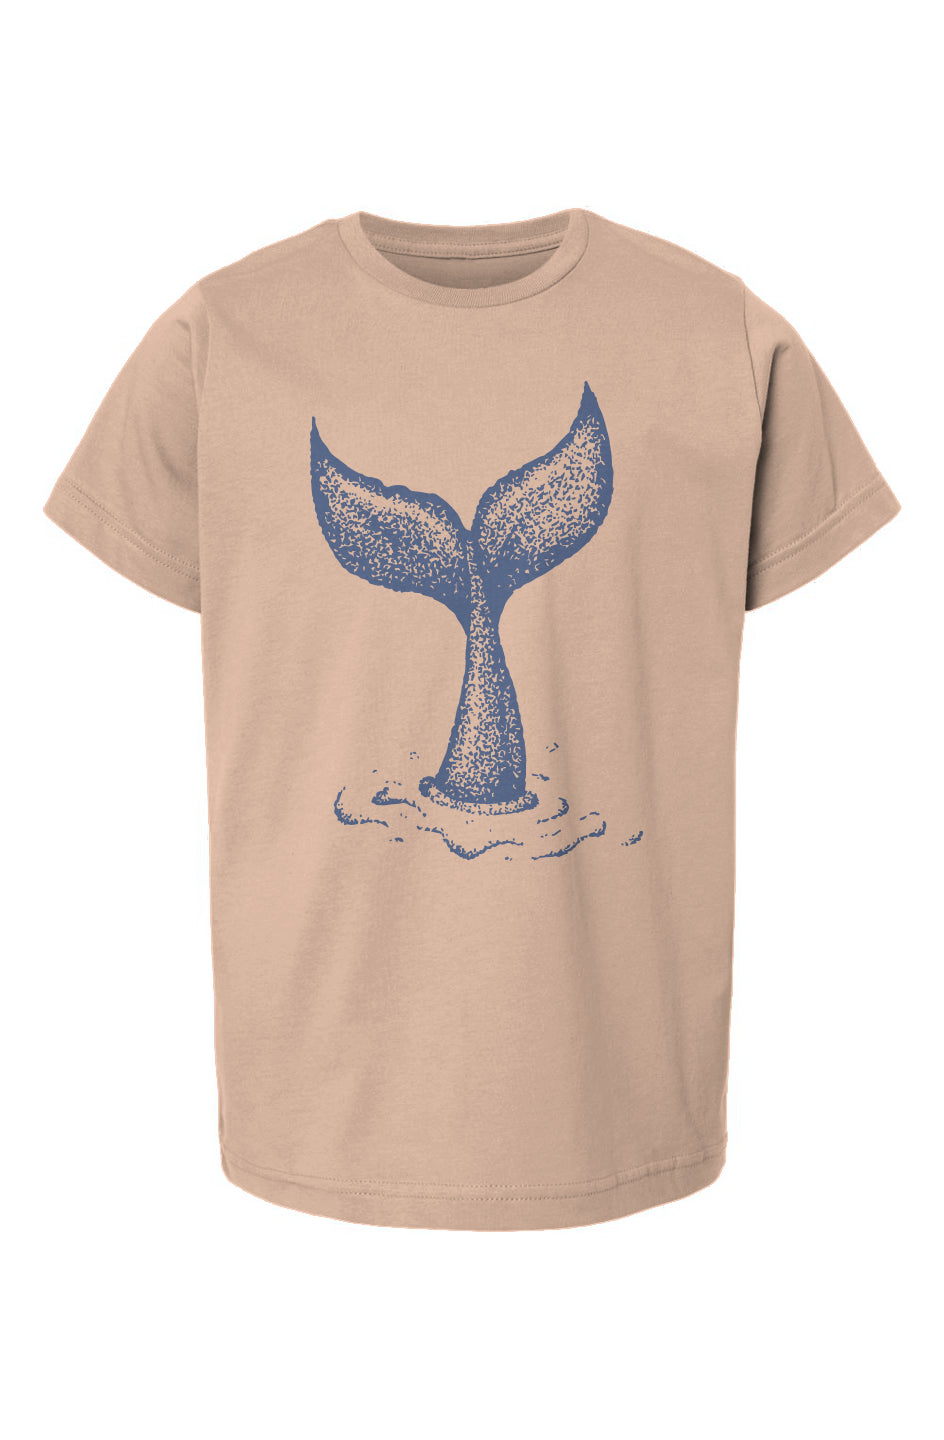 Whale Tail Youth Tee